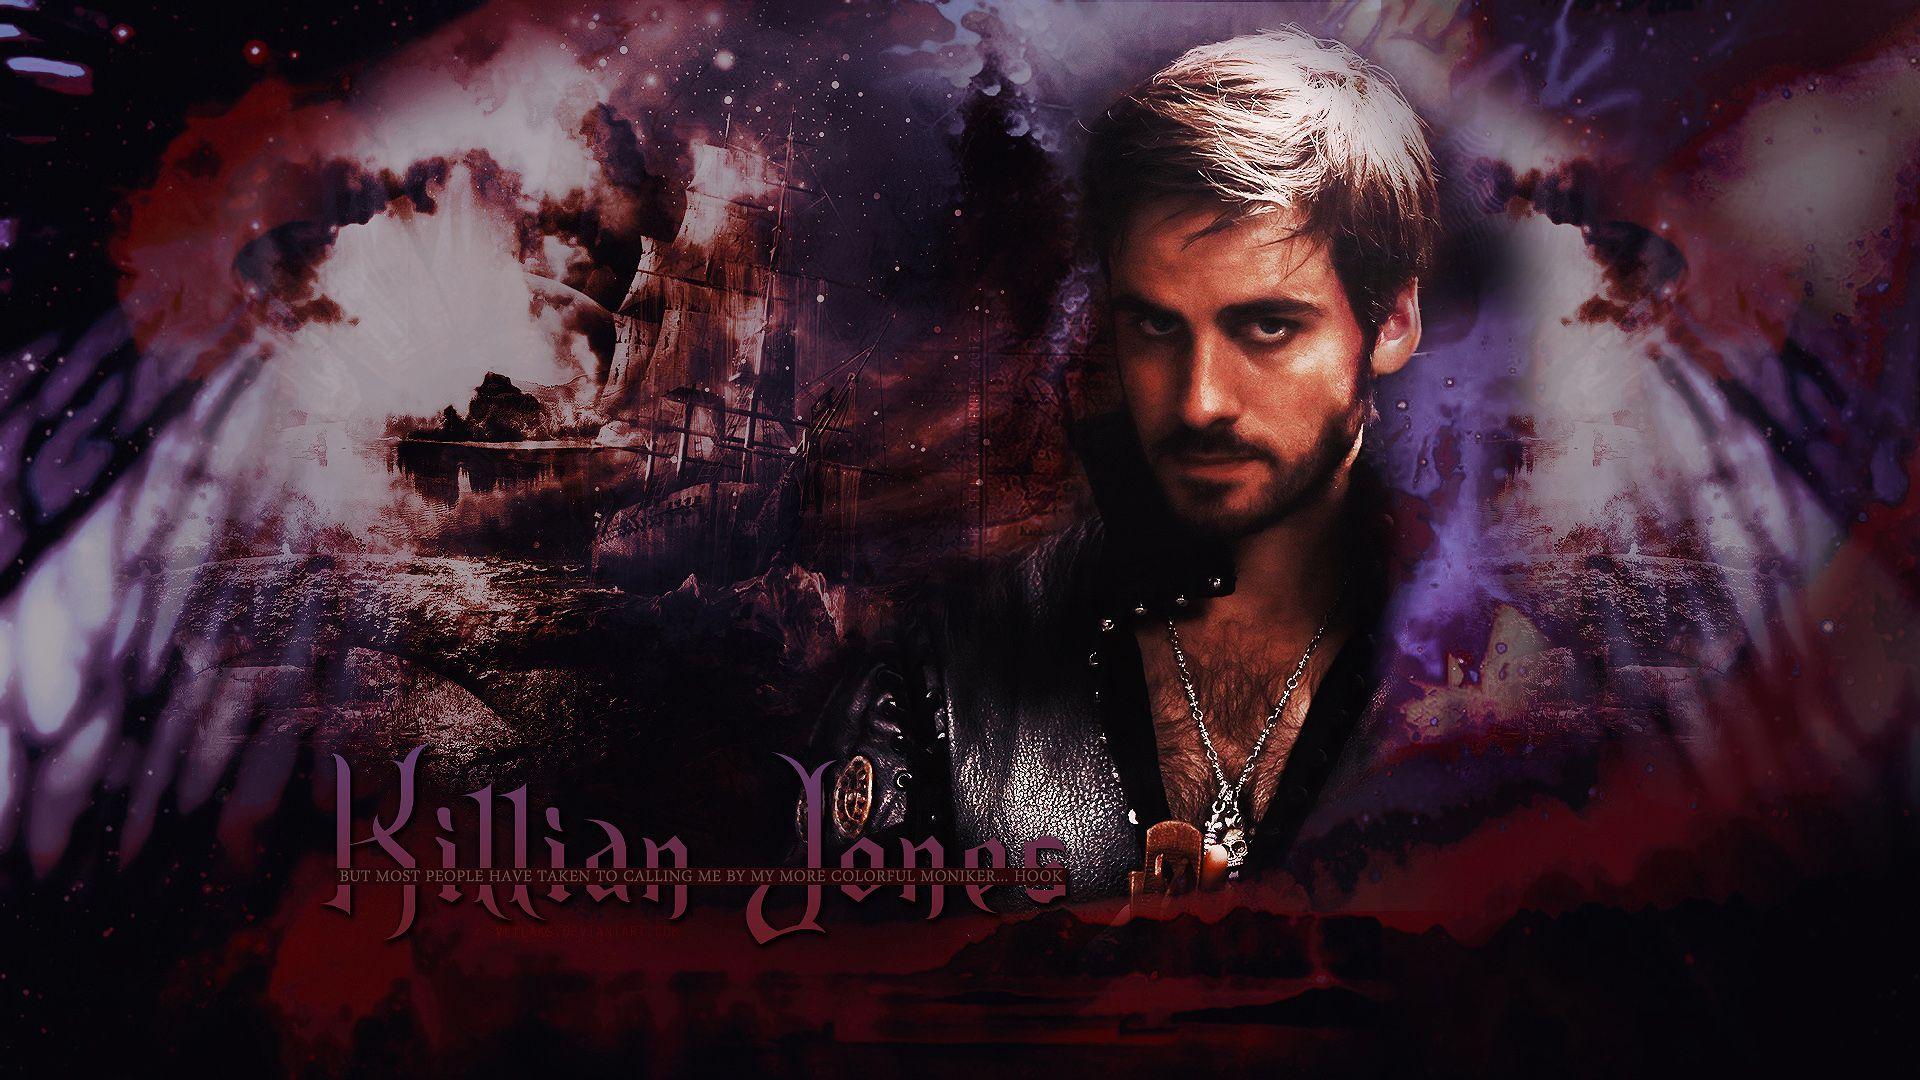 Once Upon a Time Hook Actor. Once Upon A Time Image on